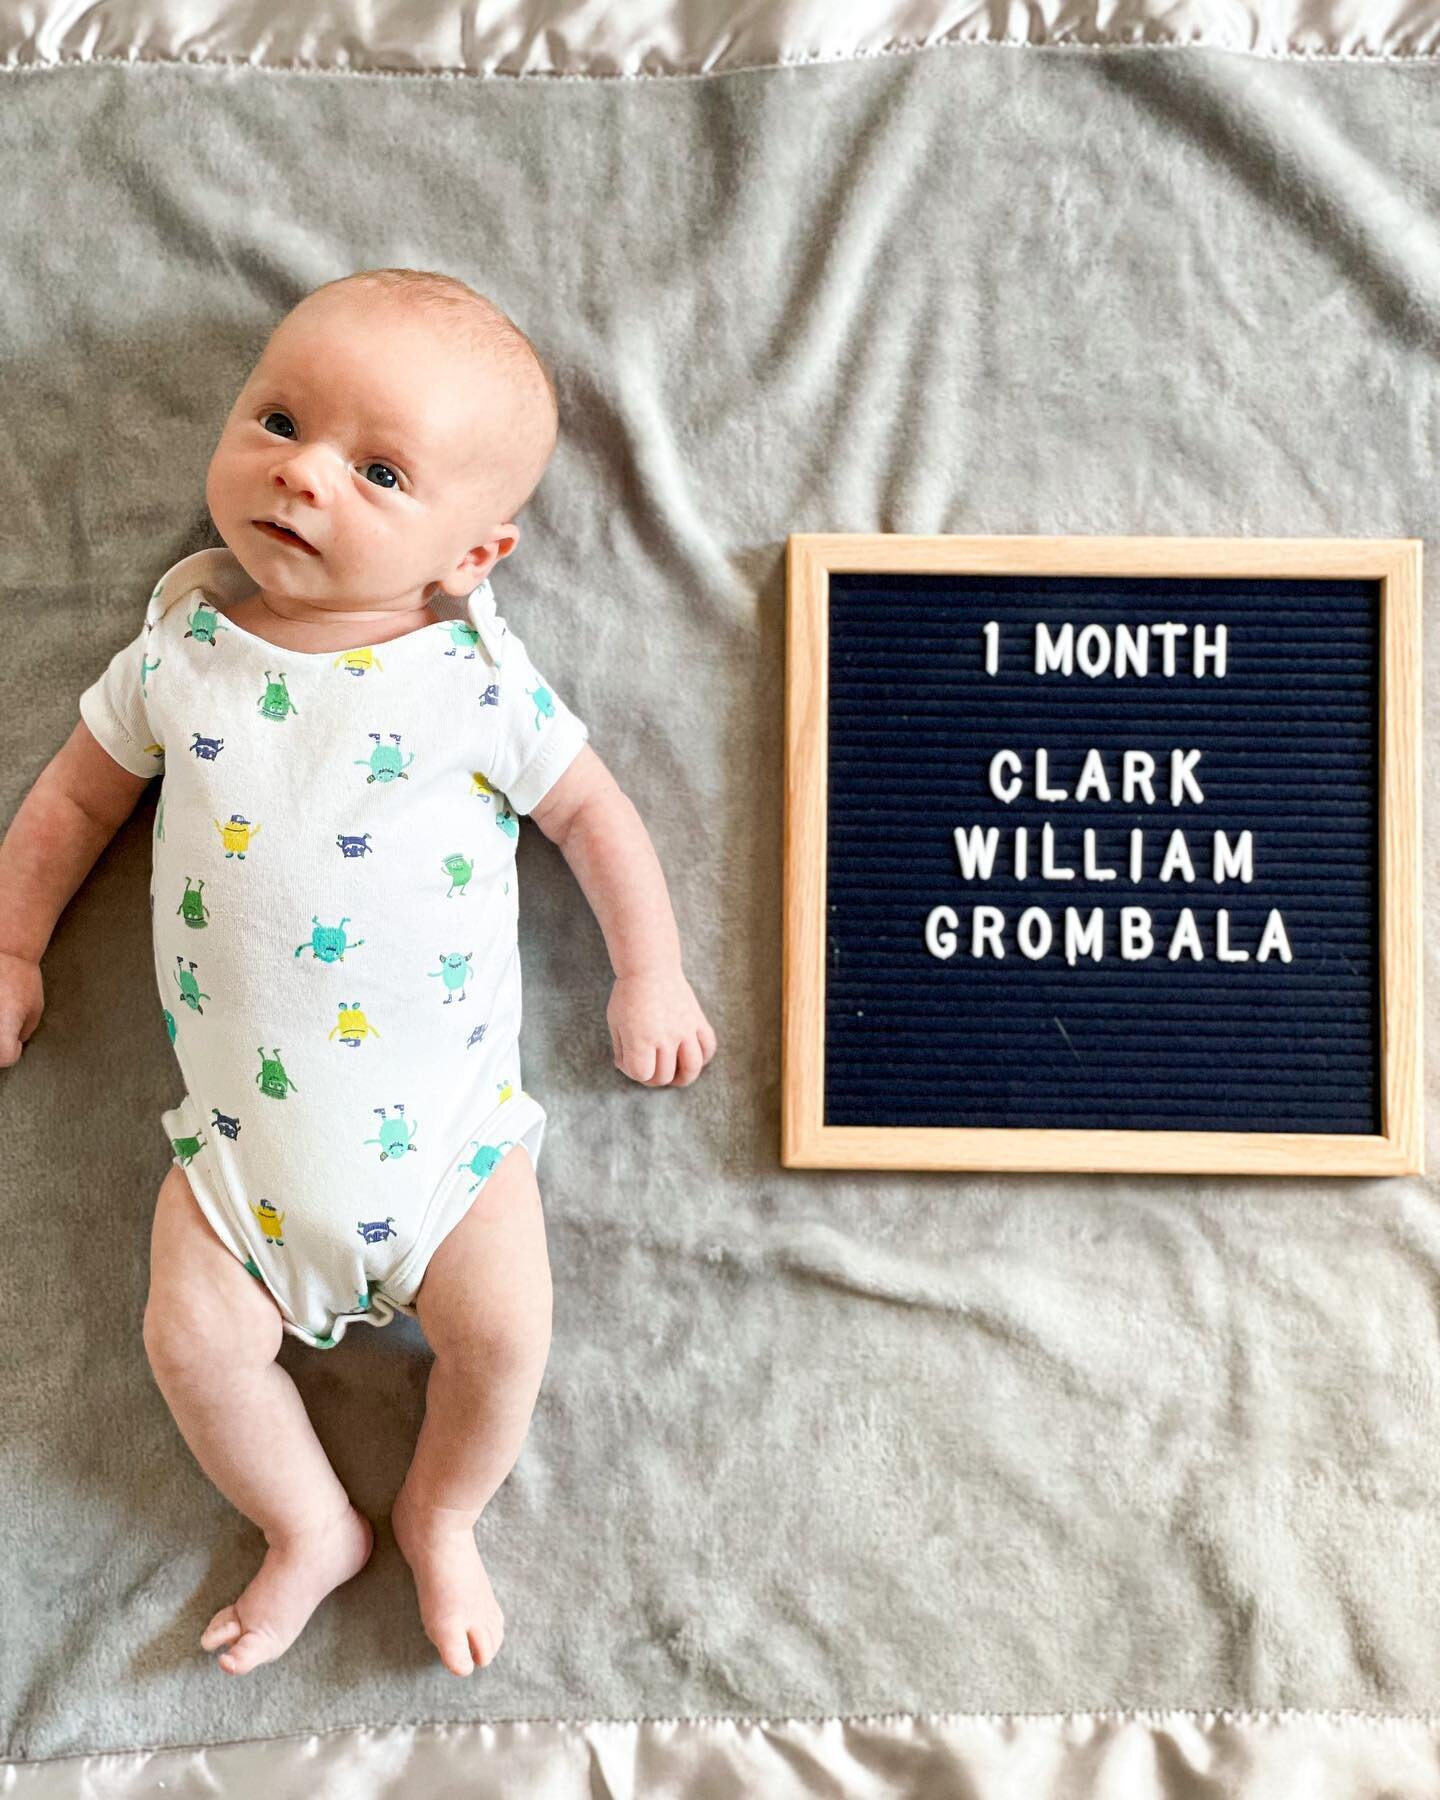 In typical new parent fashion, we&rsquo;re a day late but Happy 1 Month to our little dude! Love you, Clark &hearts;️
.
Likes: Car rides, porch time, side-eye &amp; naps.
.
Dislikes: Diaper changes, being set down, &amp; bees dying at an alarming rat